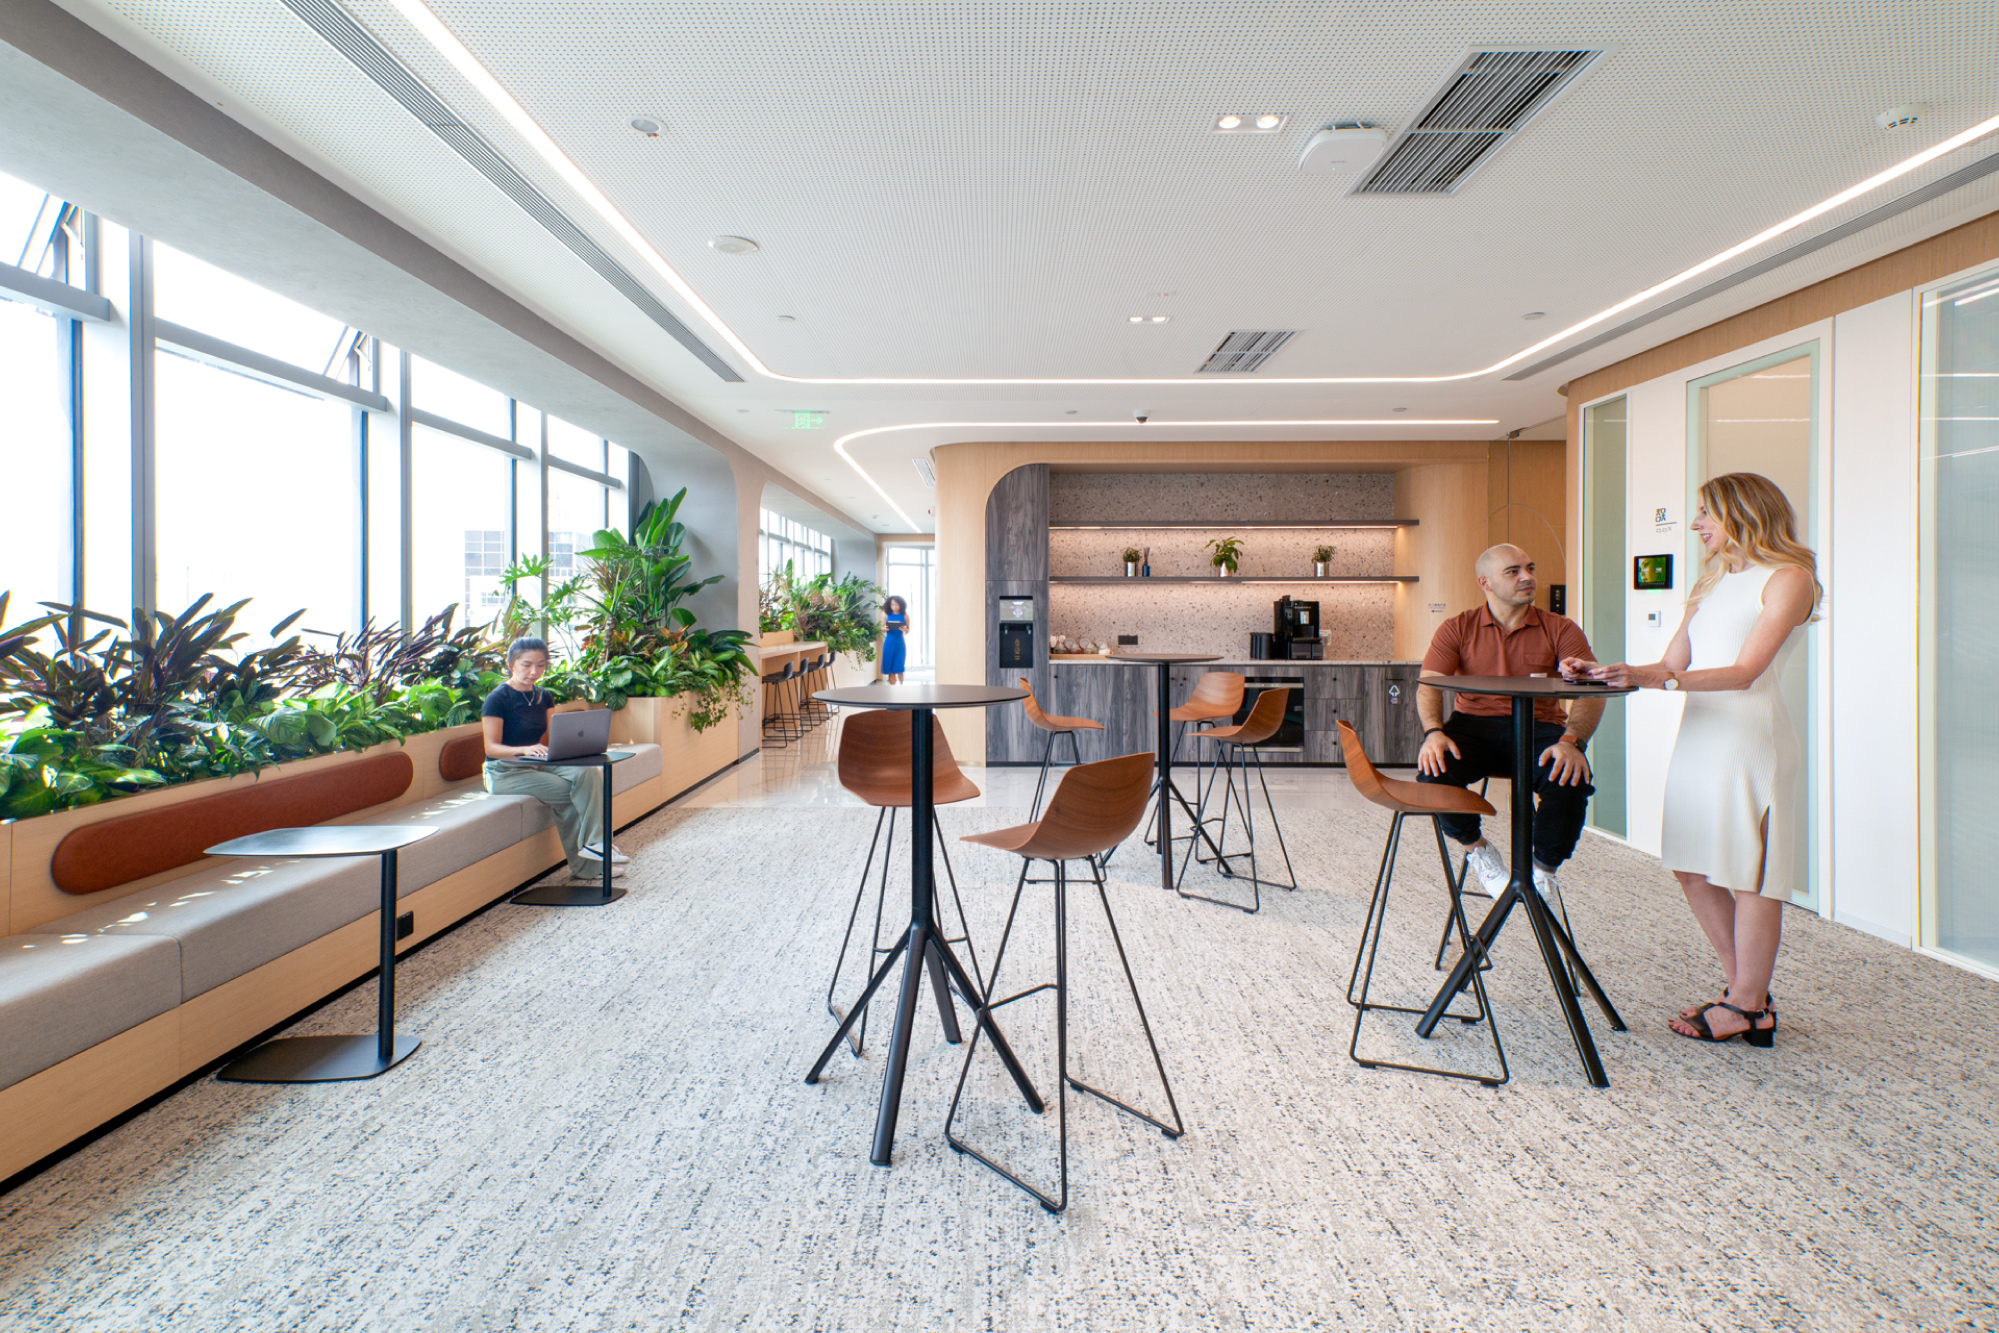 Flexible workplaces that combine a variety of roles with different spaces